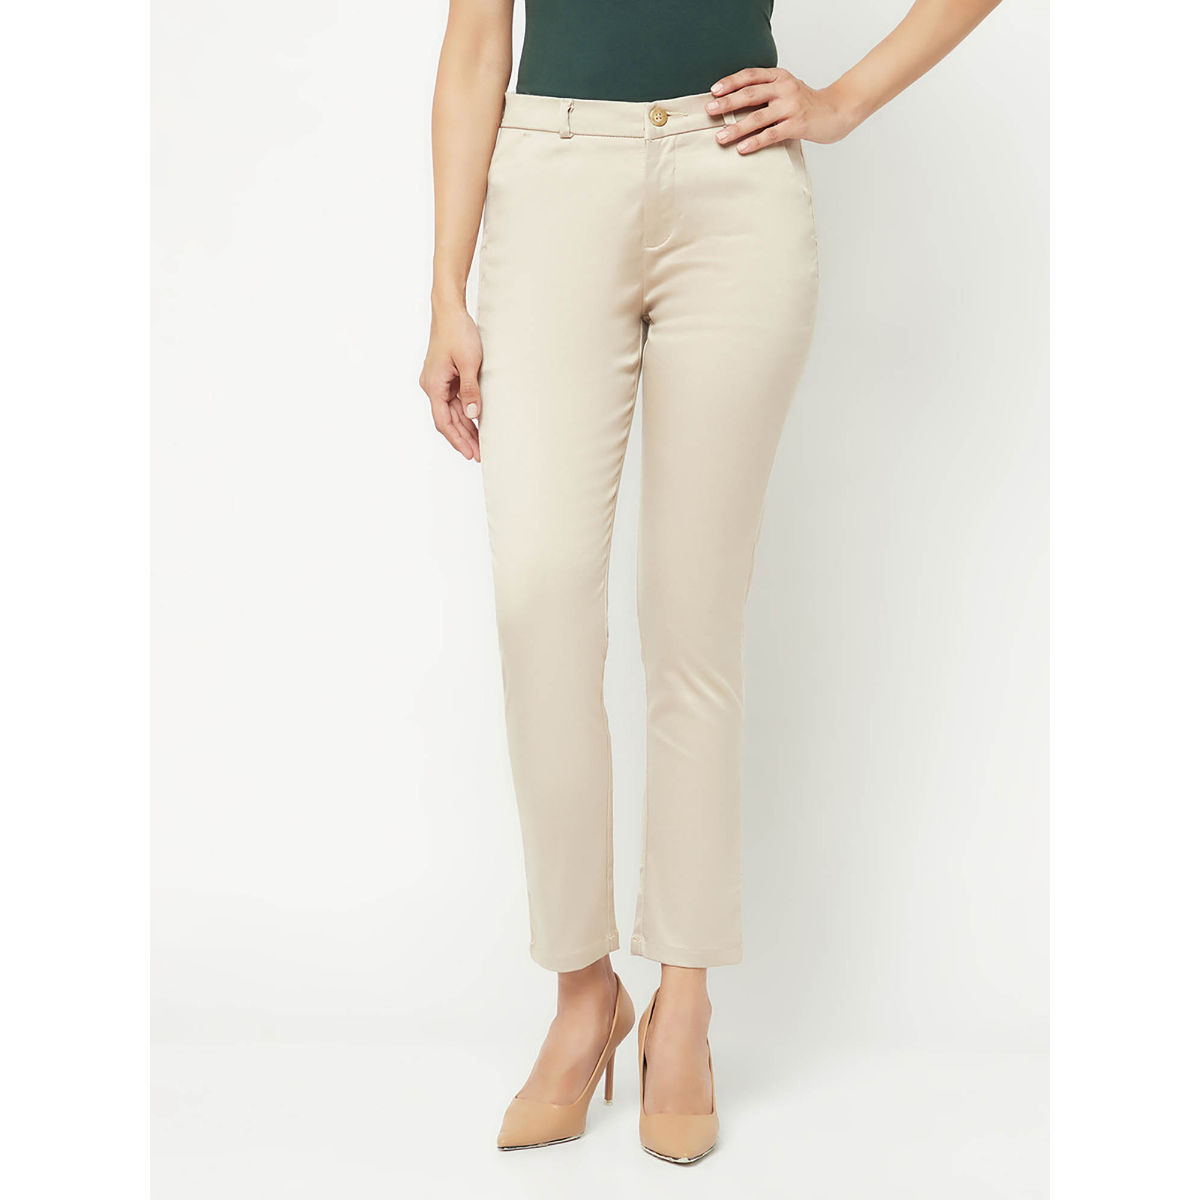 Buy FASHION CLOUD Lycra Casual/Formal Trousers for Womens (Stretchable)  Cream Beige at Amazon.in